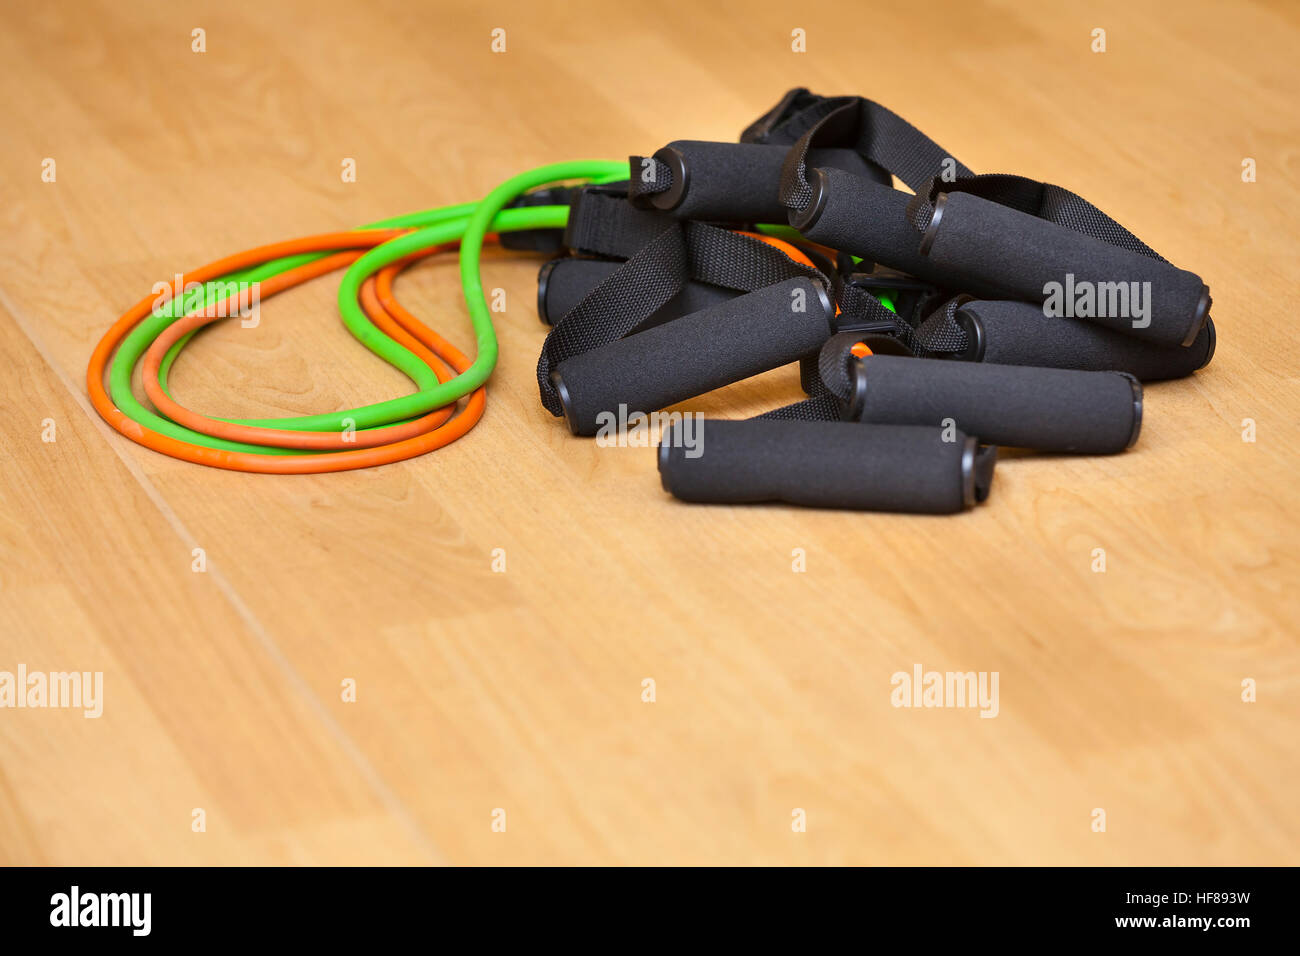 Fitness resistance bands, shallow depth of field, focus on handles Stock Photo